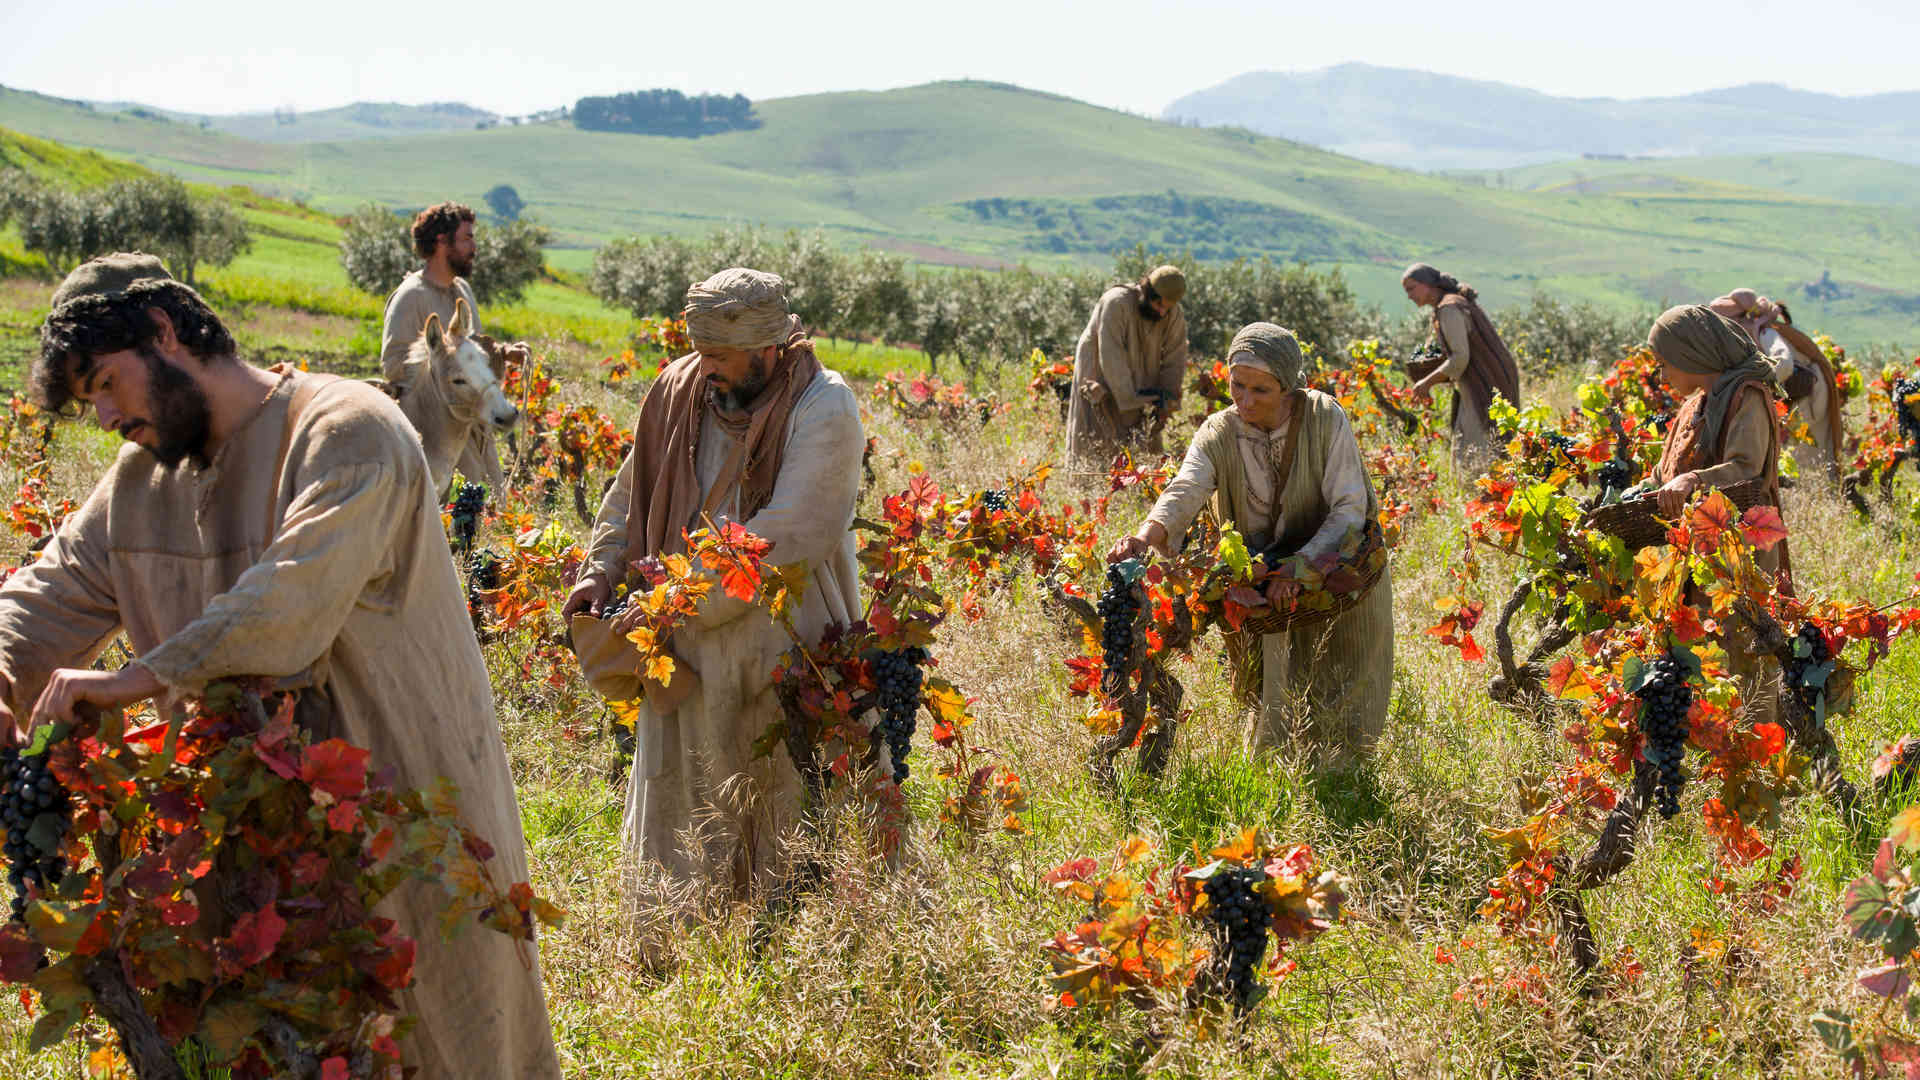 A still from a Bible Video of laborers in a vineyard, depicting one of Jesus's parables.